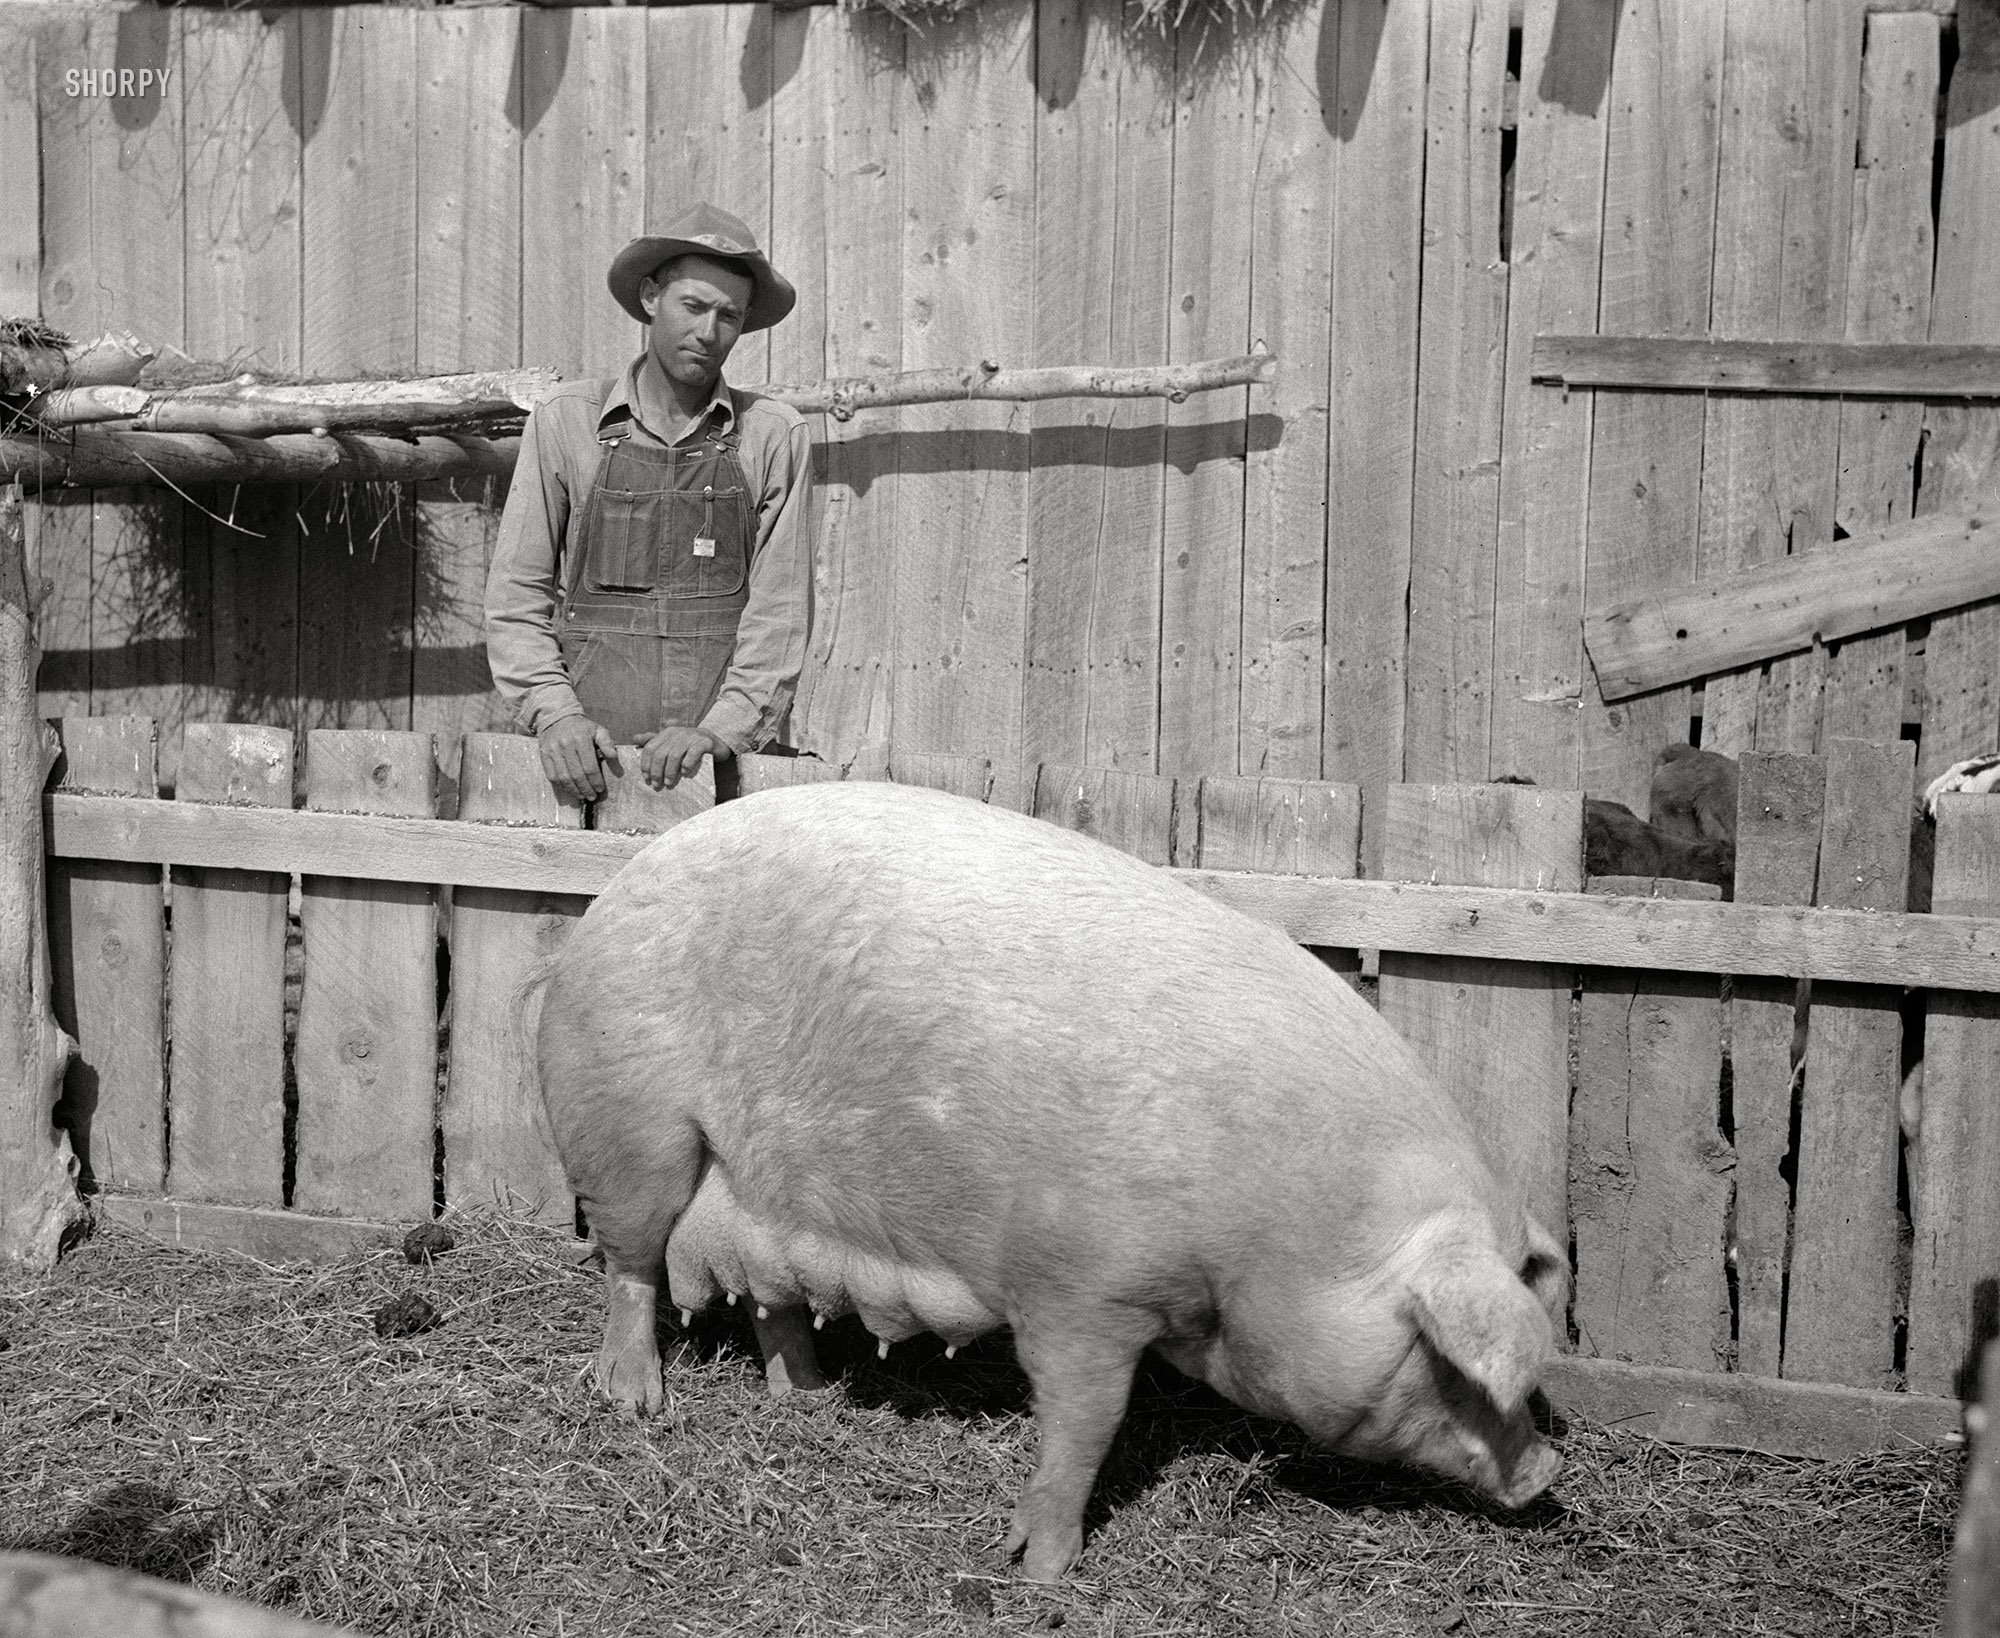 1940. "Curtis Whitlock, Sanpete County, Utah, Farm Security Administration rehabilitation client, was on Work Projects Administration relief for a time before he was able to rent a farm, after having lost out once in farming. His Farm Security Administration loan put him on his feet and bought him breeding stock such as the purebred sow in this picture, foundation dairy cows, and a fine work mare." Medium-format negative, photographer unknown. View full size.